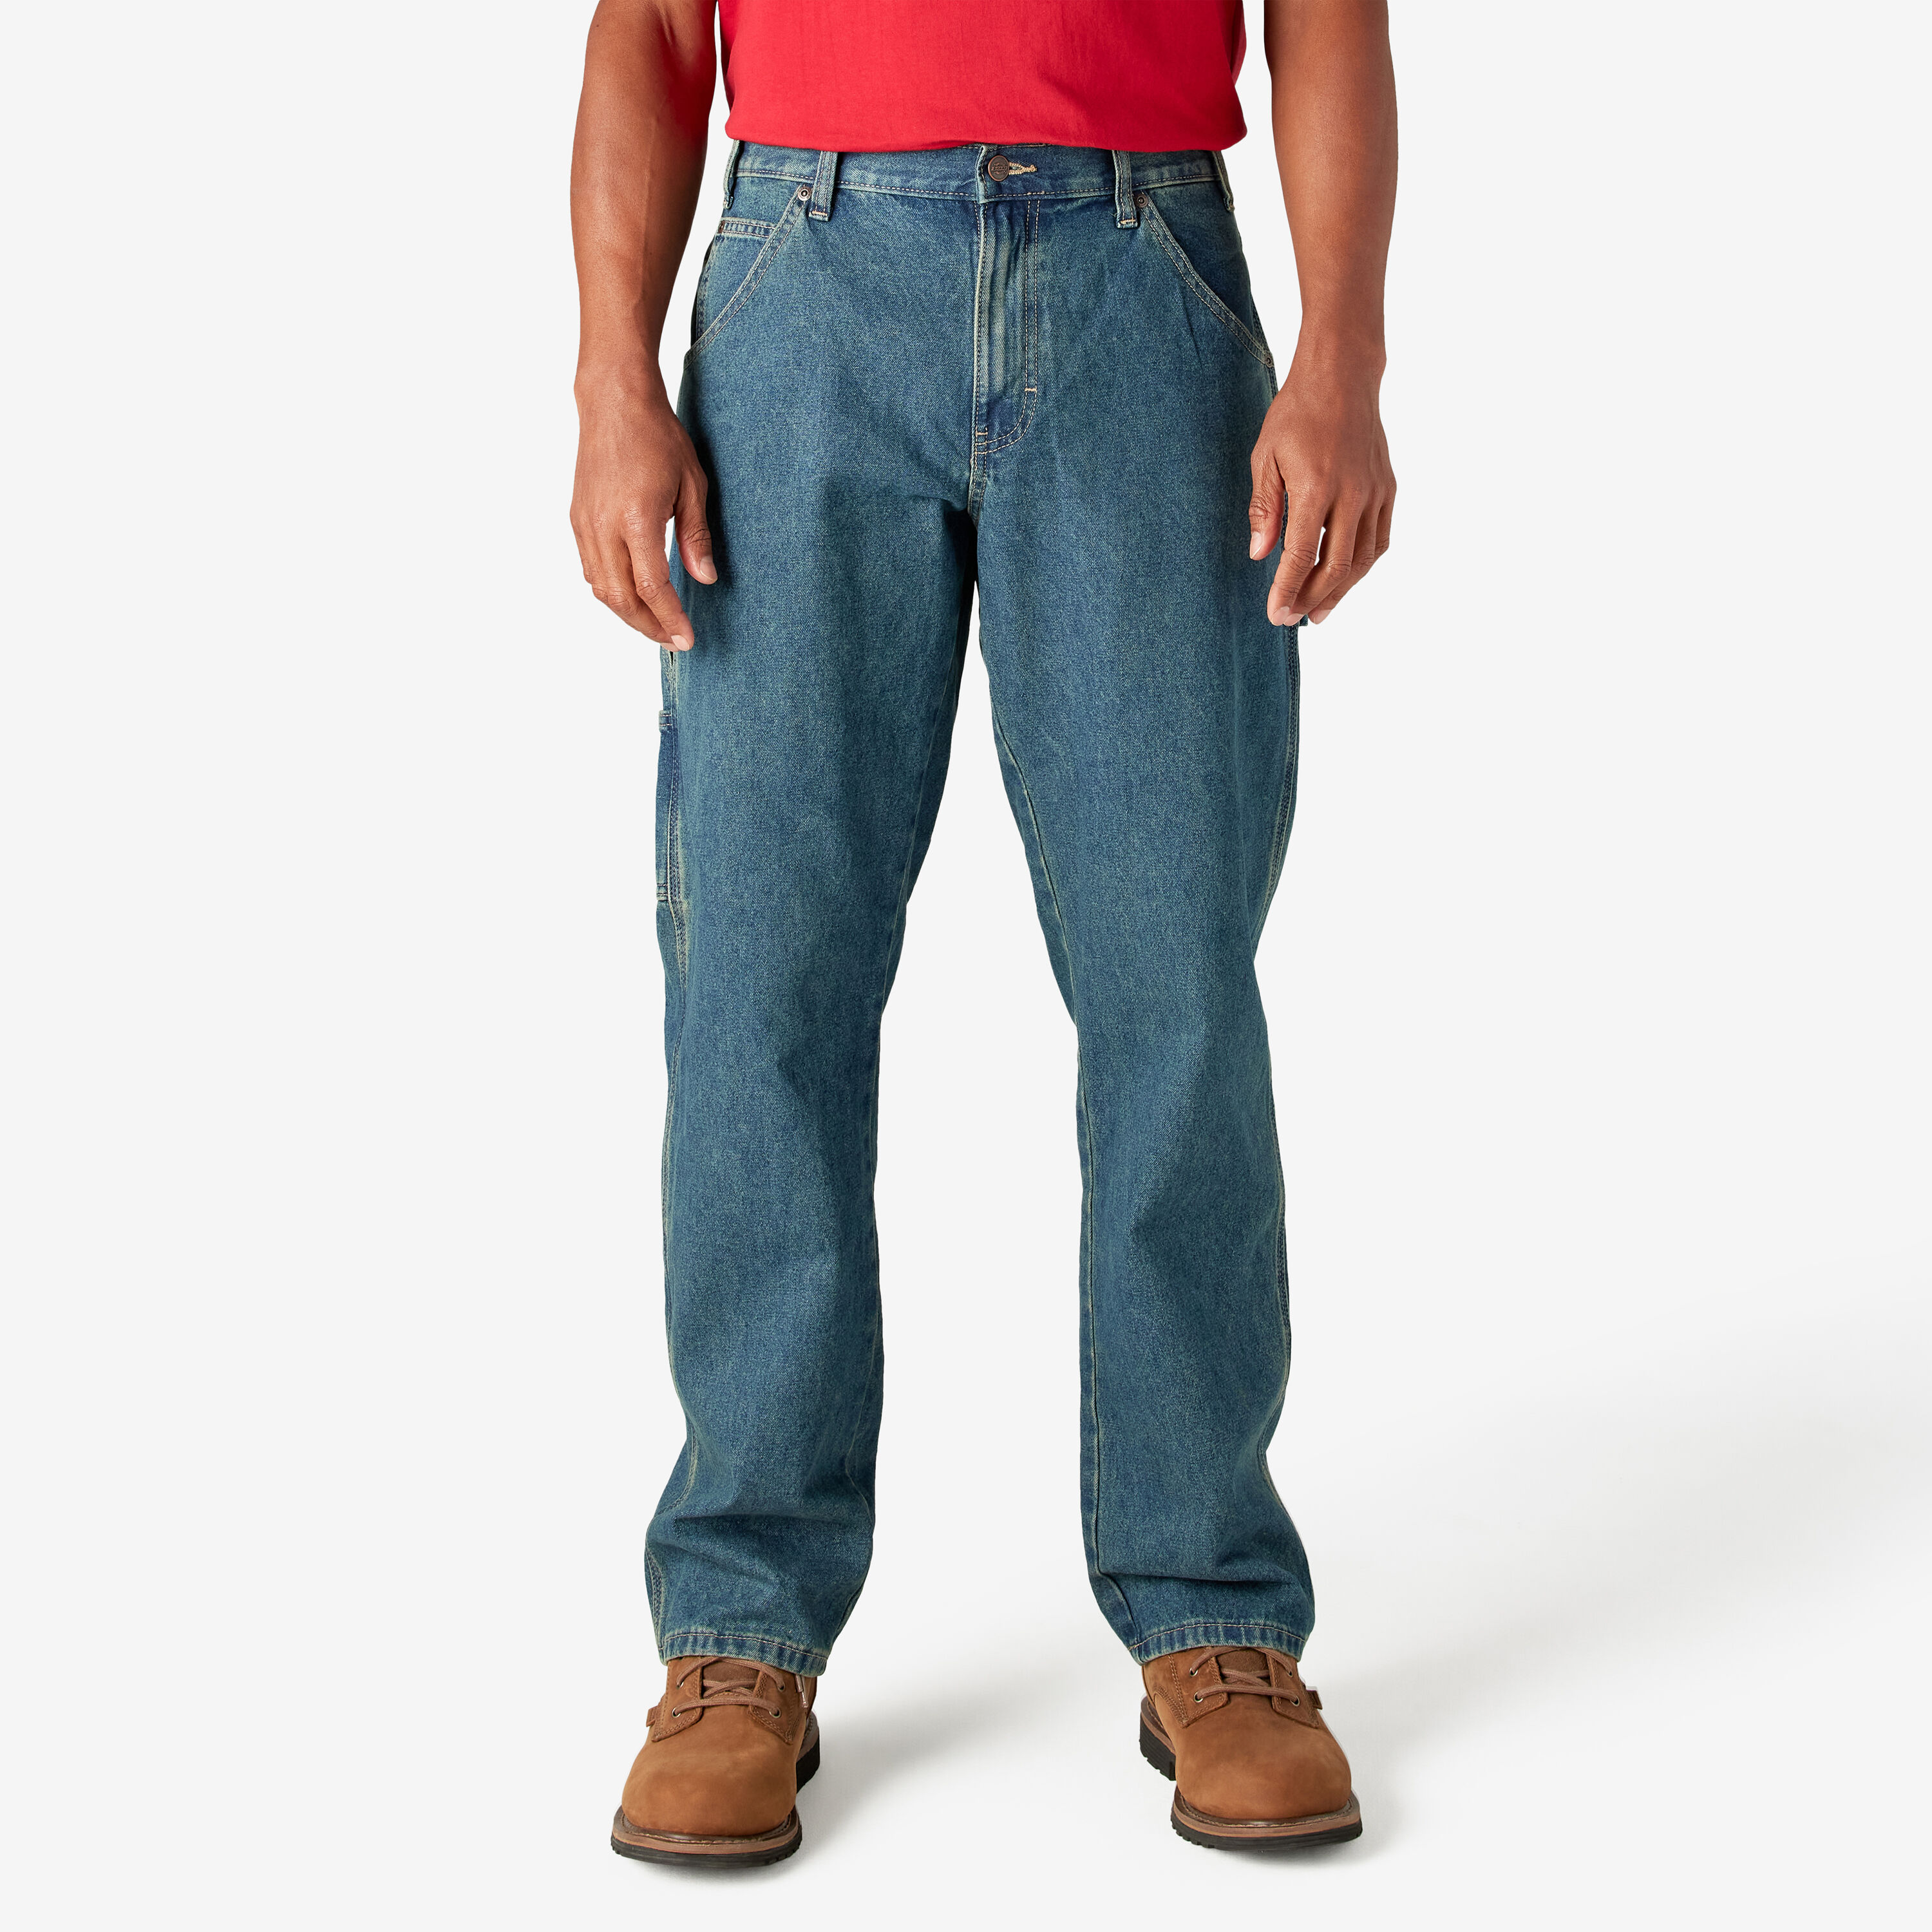 Men's Jeans - Work Jeans, Relaxed Jeans & Regular Fit Jeans for 